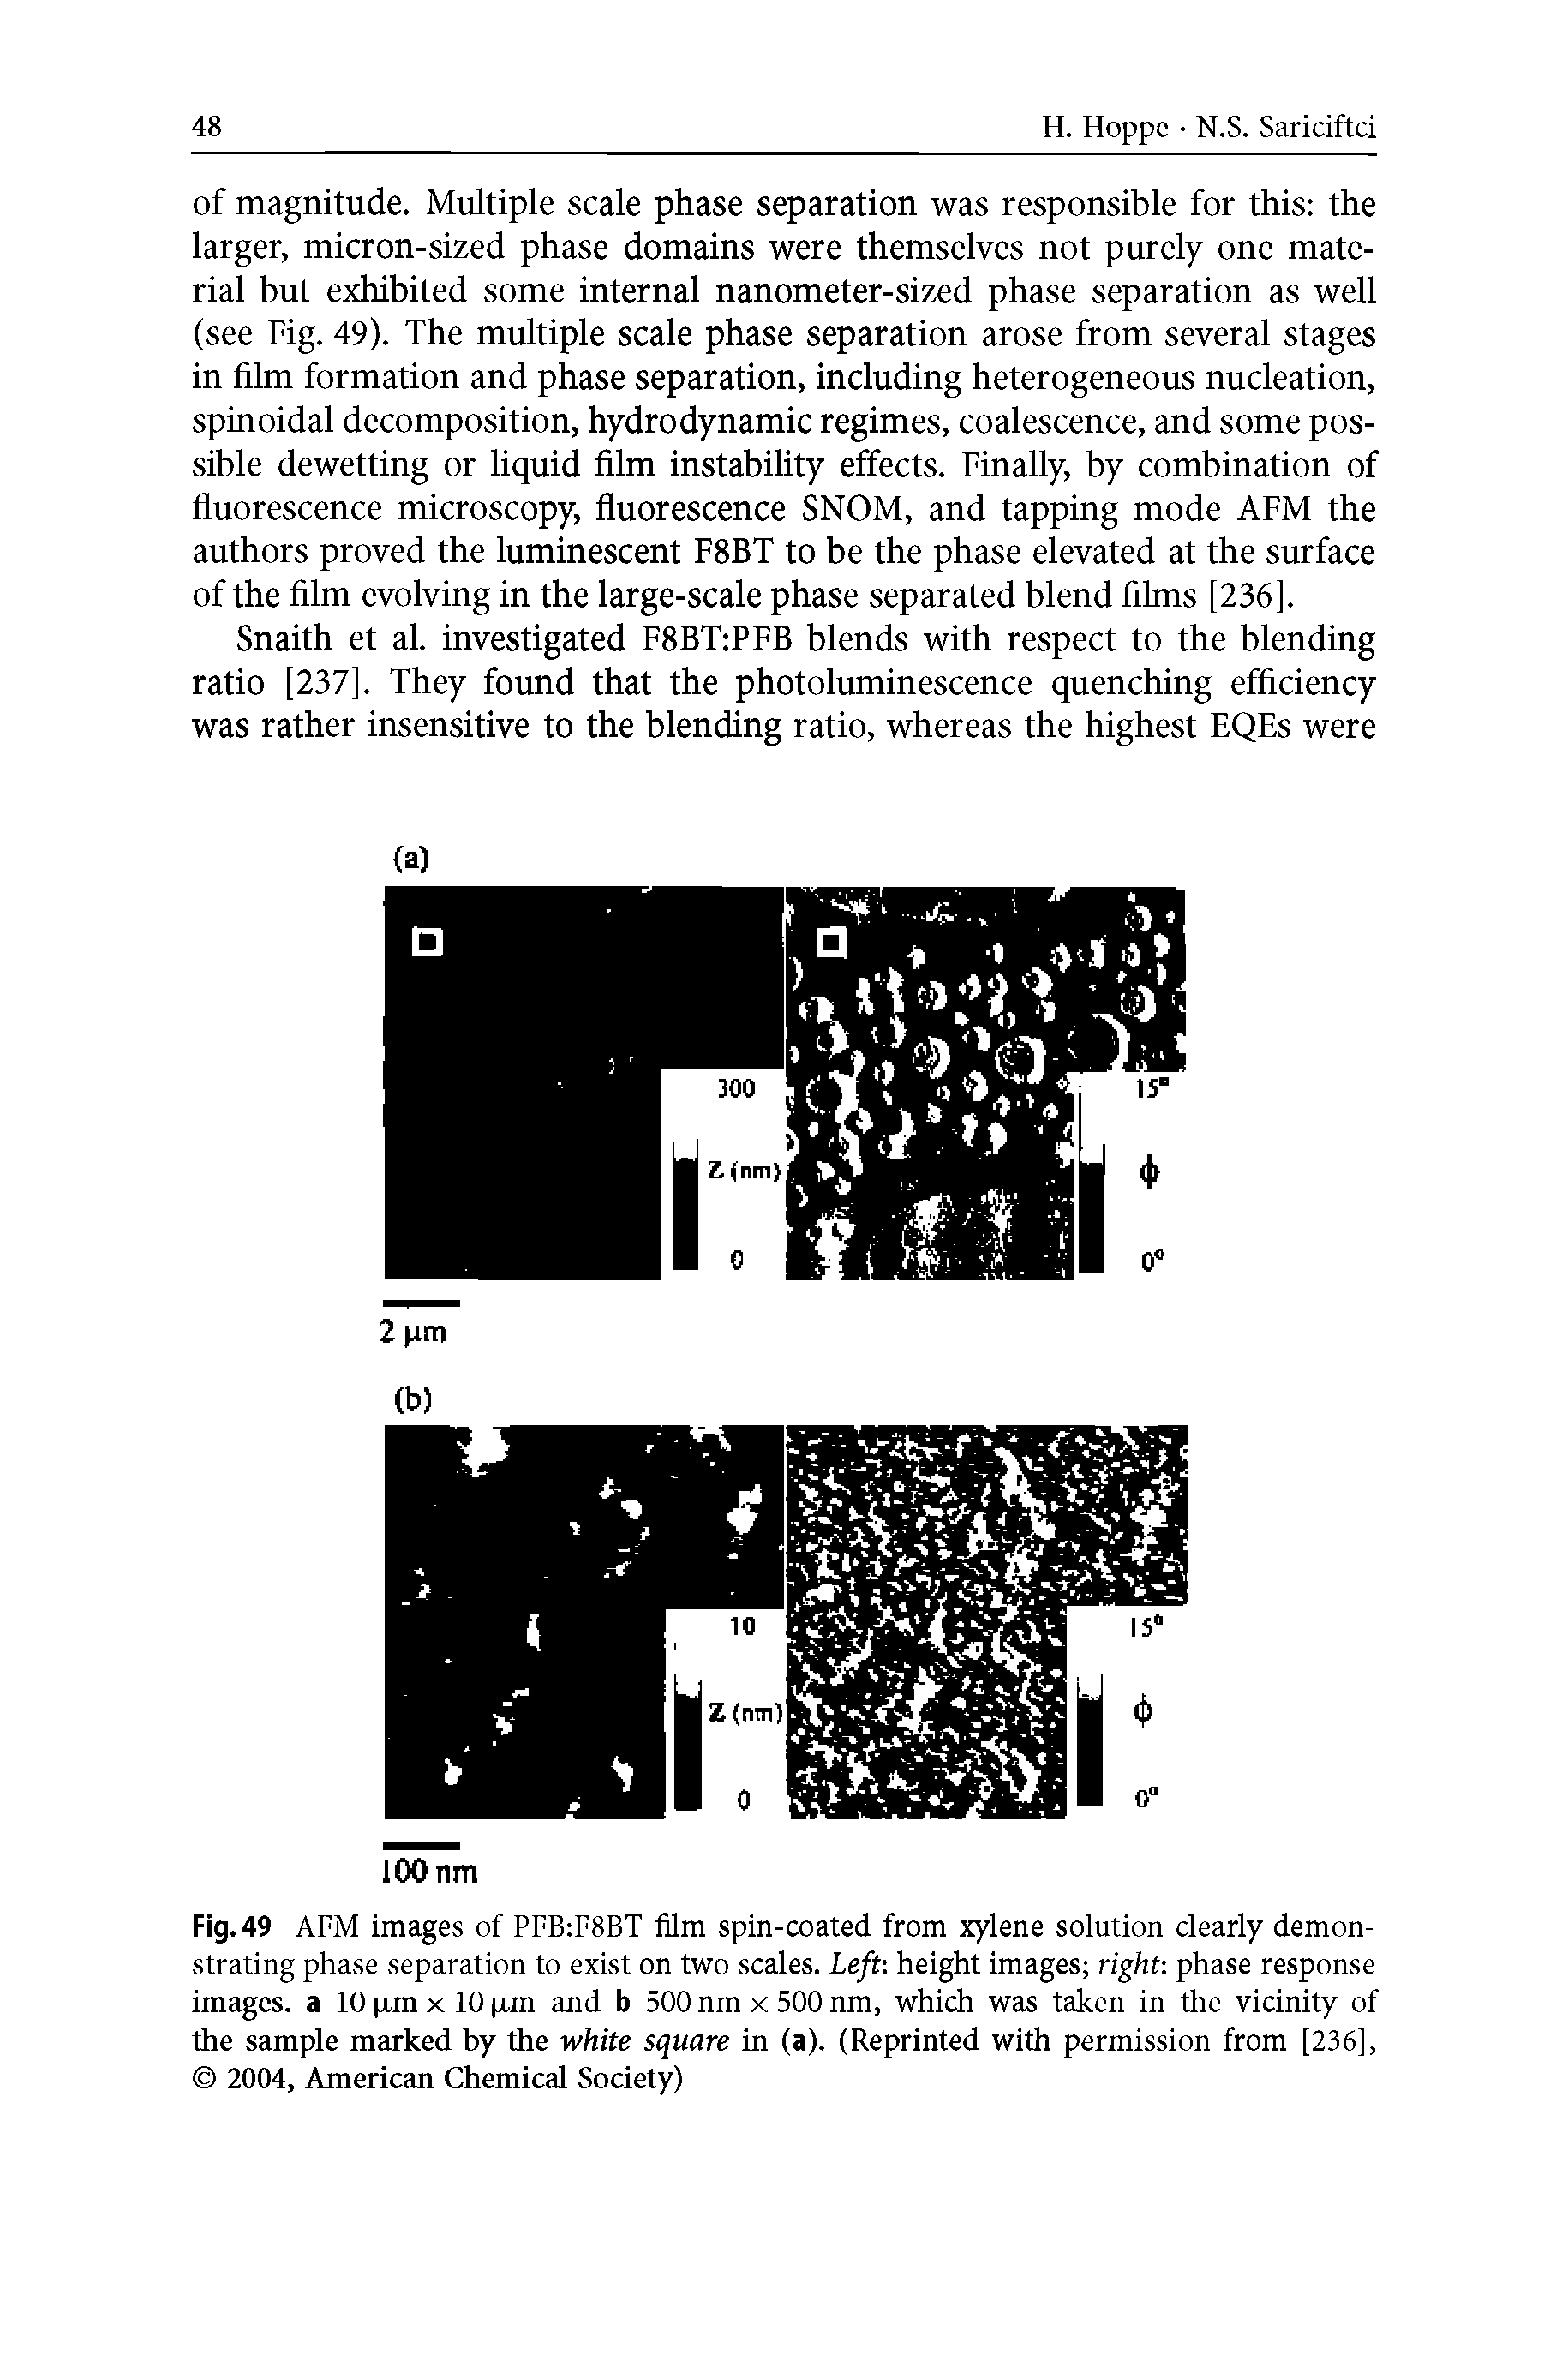 Fig. 49 AFM images of PFB F8BT film spin-coated from xylene solution clearly demonstrating phase separation to exist on two scales. Left height images right phase response images, a 10 p,m x 10 p,m and b 500 nm x 500 nm, which was taken in the vicinity of the sample marked by the white square in (a). (Reprinted with permission from [236], 2004, American Chemical Society)...